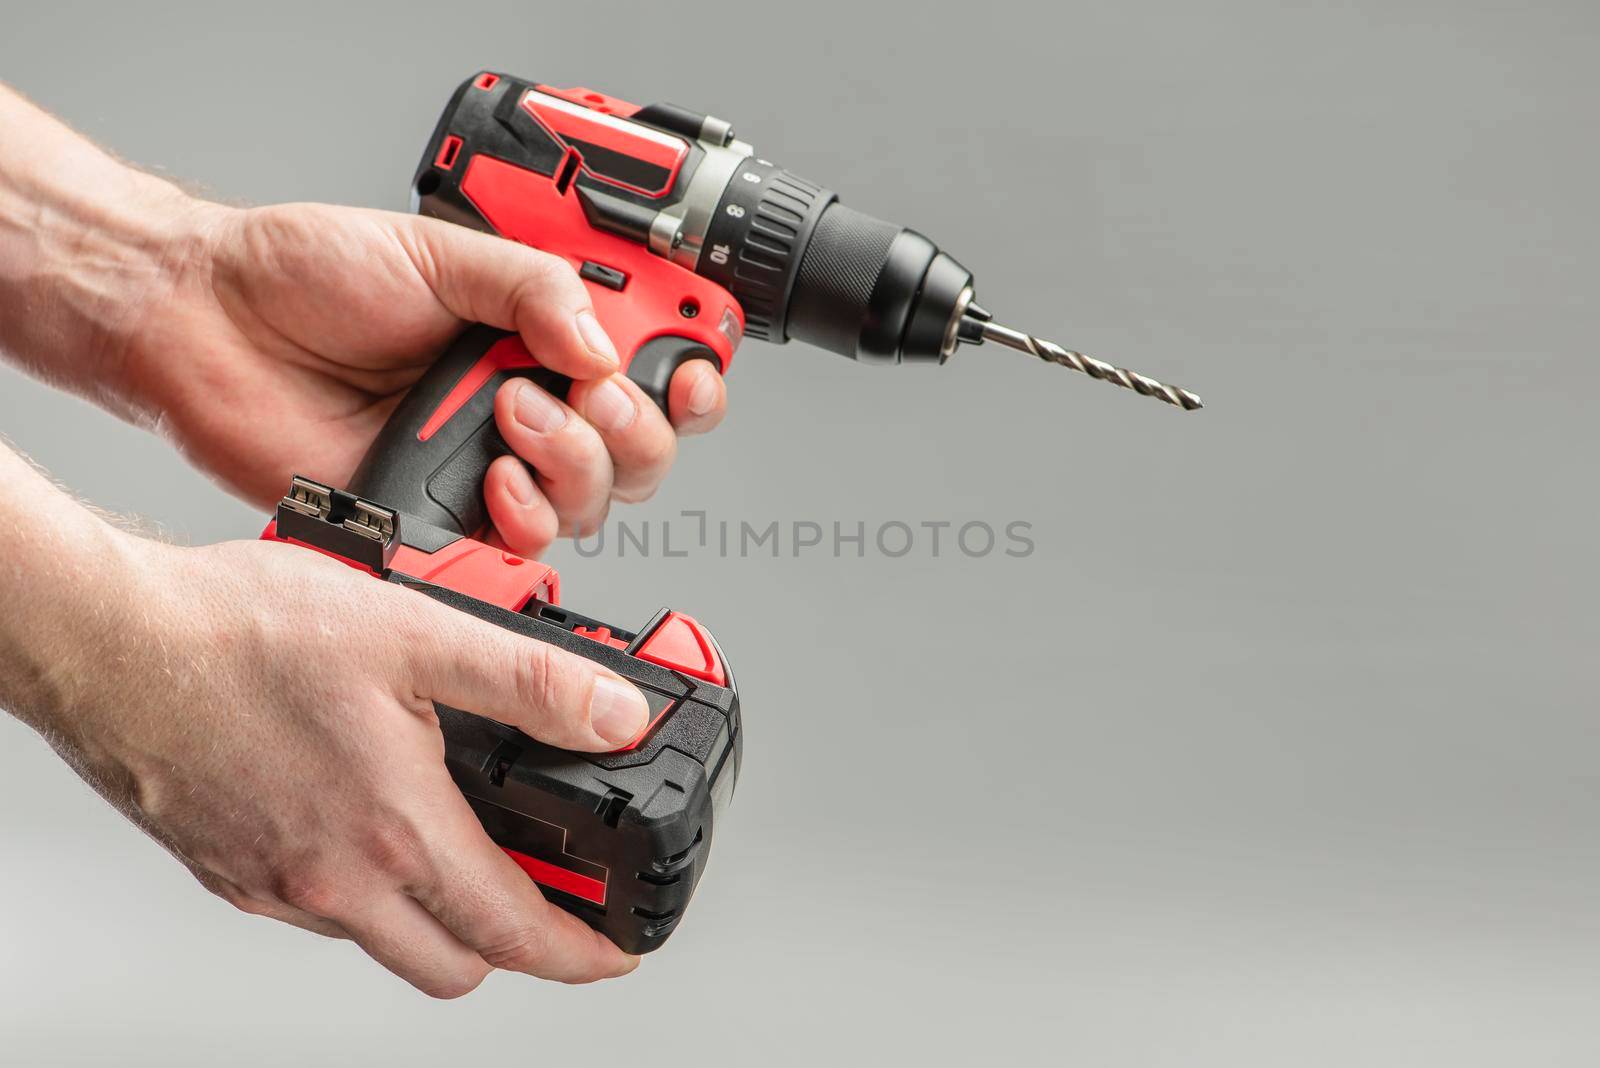 a man's hand removes the battery from a cordless tool. A man inserts a battery into a screwdriver. Repair and construction concept on gray background.